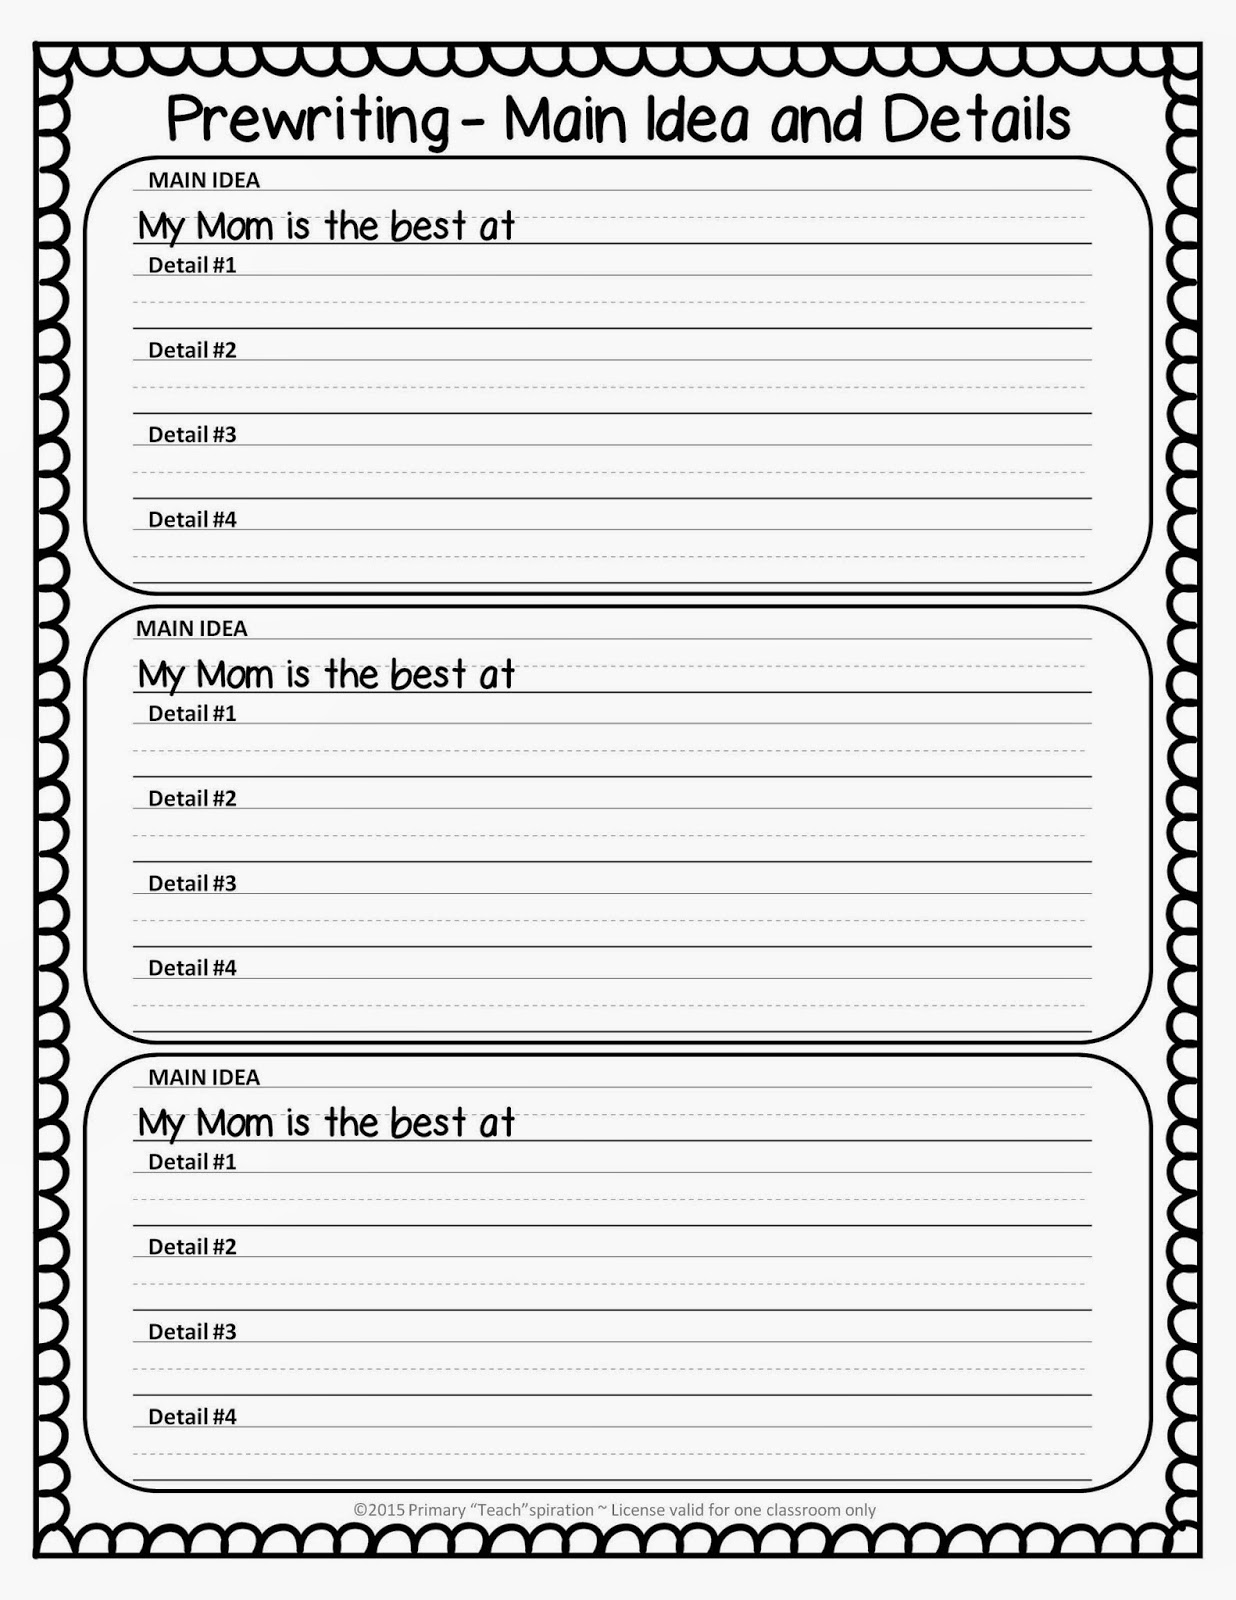 Main Idea And Details Second Grade Worksheets  1000 images about main idea and details on 